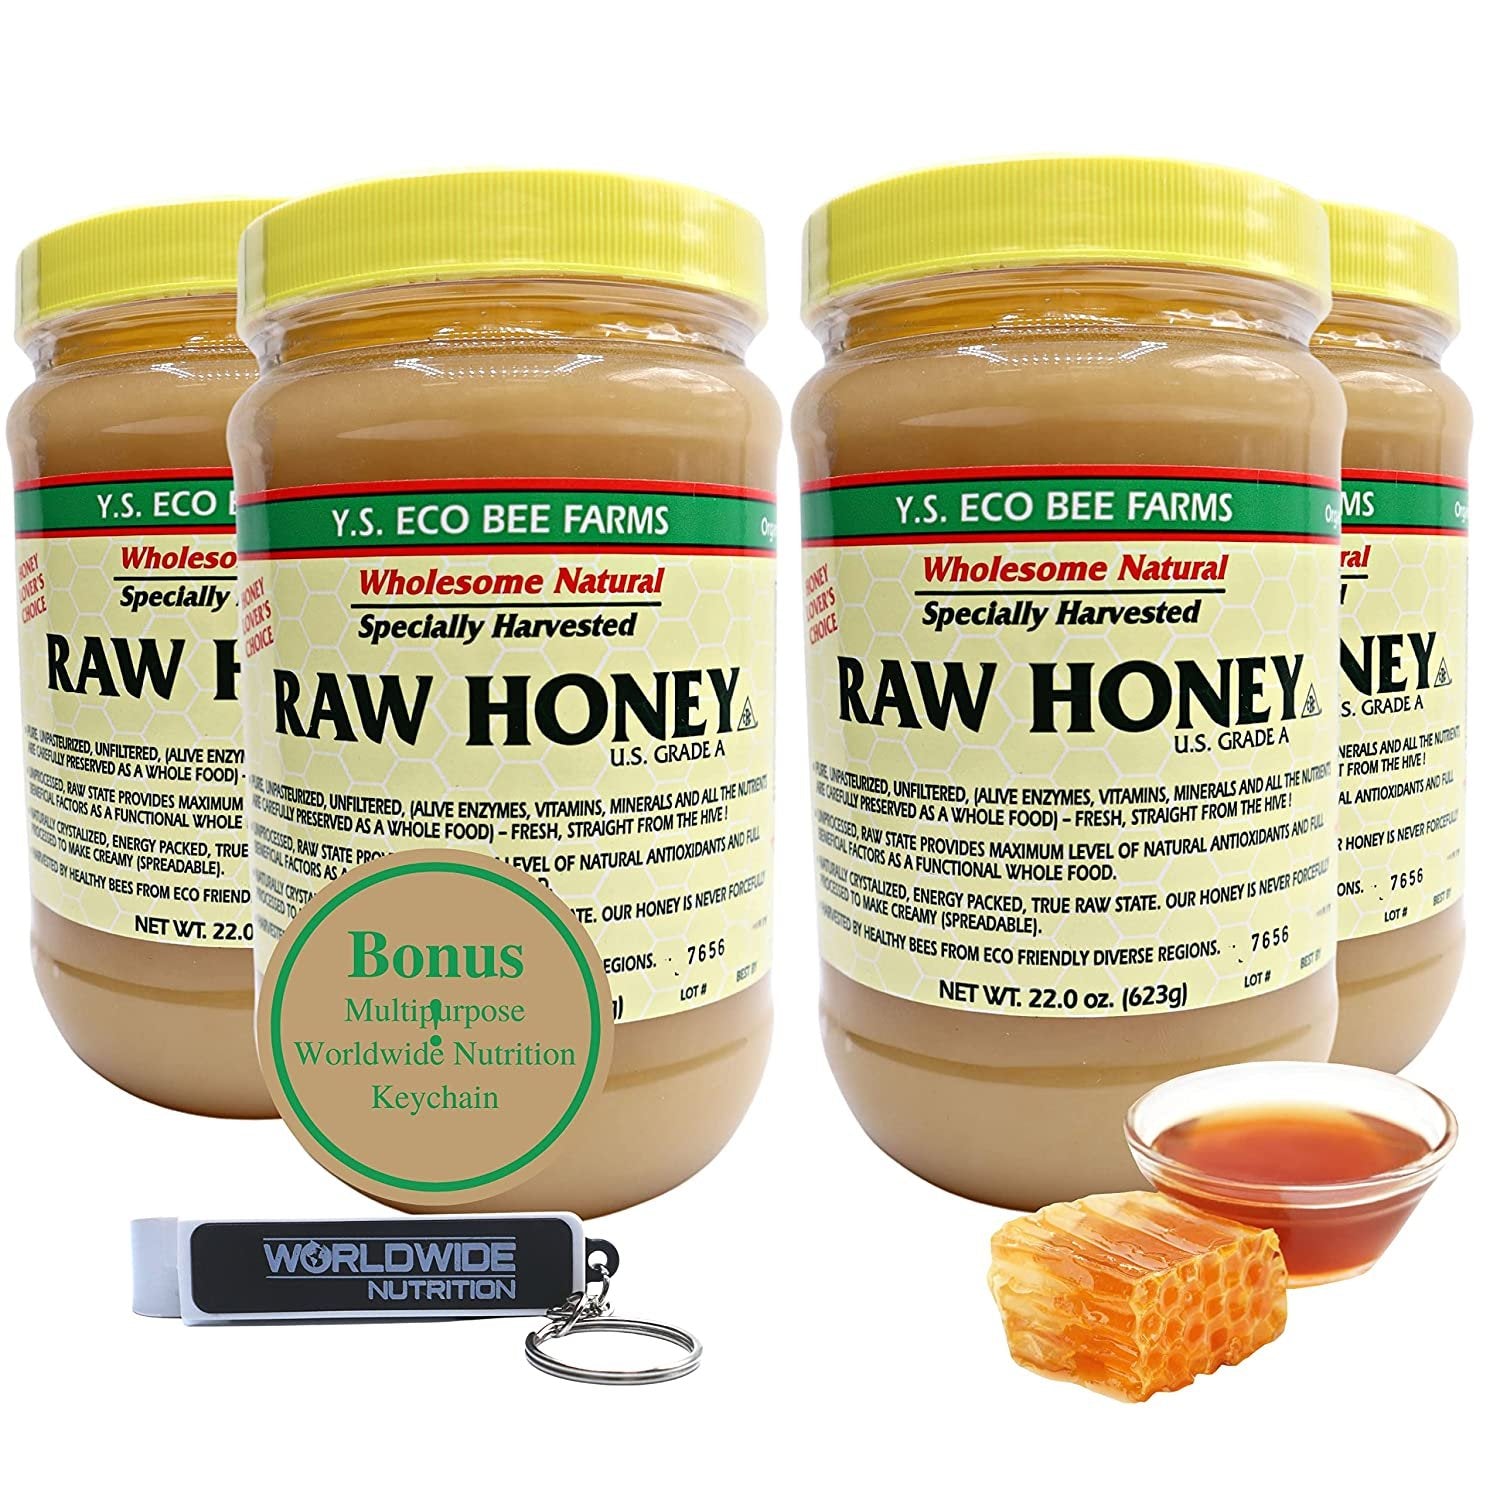 Y.S. Eco Bee Farms, Y.S. Organic Bee Farms, Wholesome Natural Raw Honey, Unpasteurized, Unfiltered, Fresh Raw State, Kosher, Pure, Natural, Healthy, Safe, Gluten Free, Specially Harvested, 22oz - 4pk